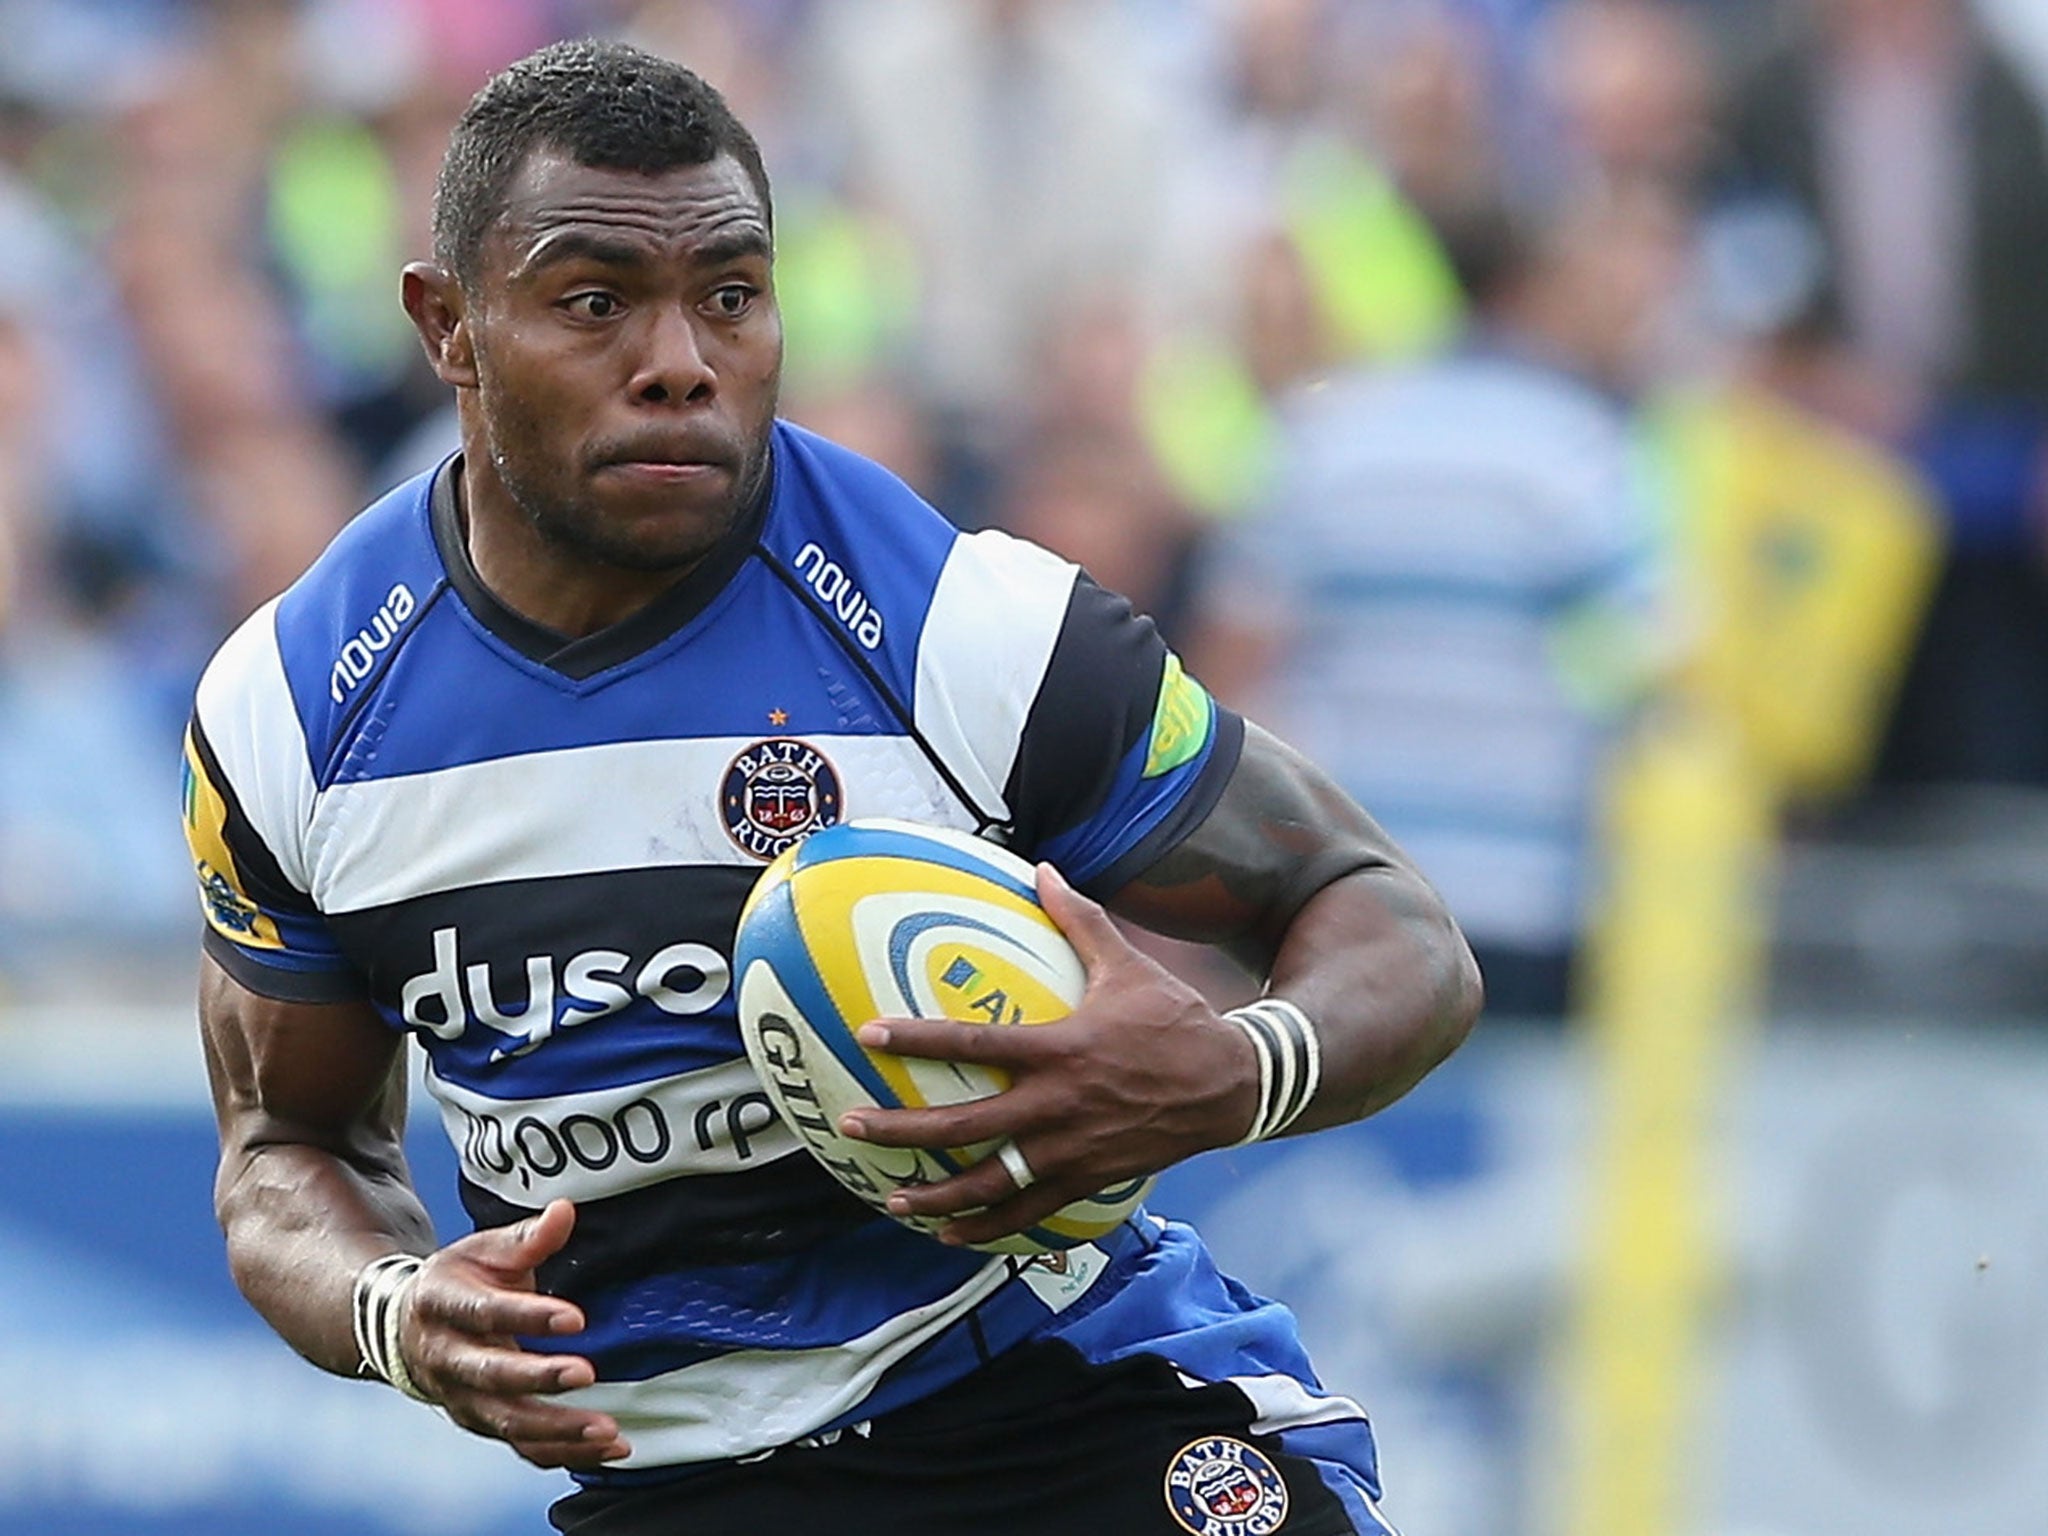 Bath’s in-form wing Semesa Rokoduguni is ready to reignite an England link with the British Army that has laid dormant for 15 years